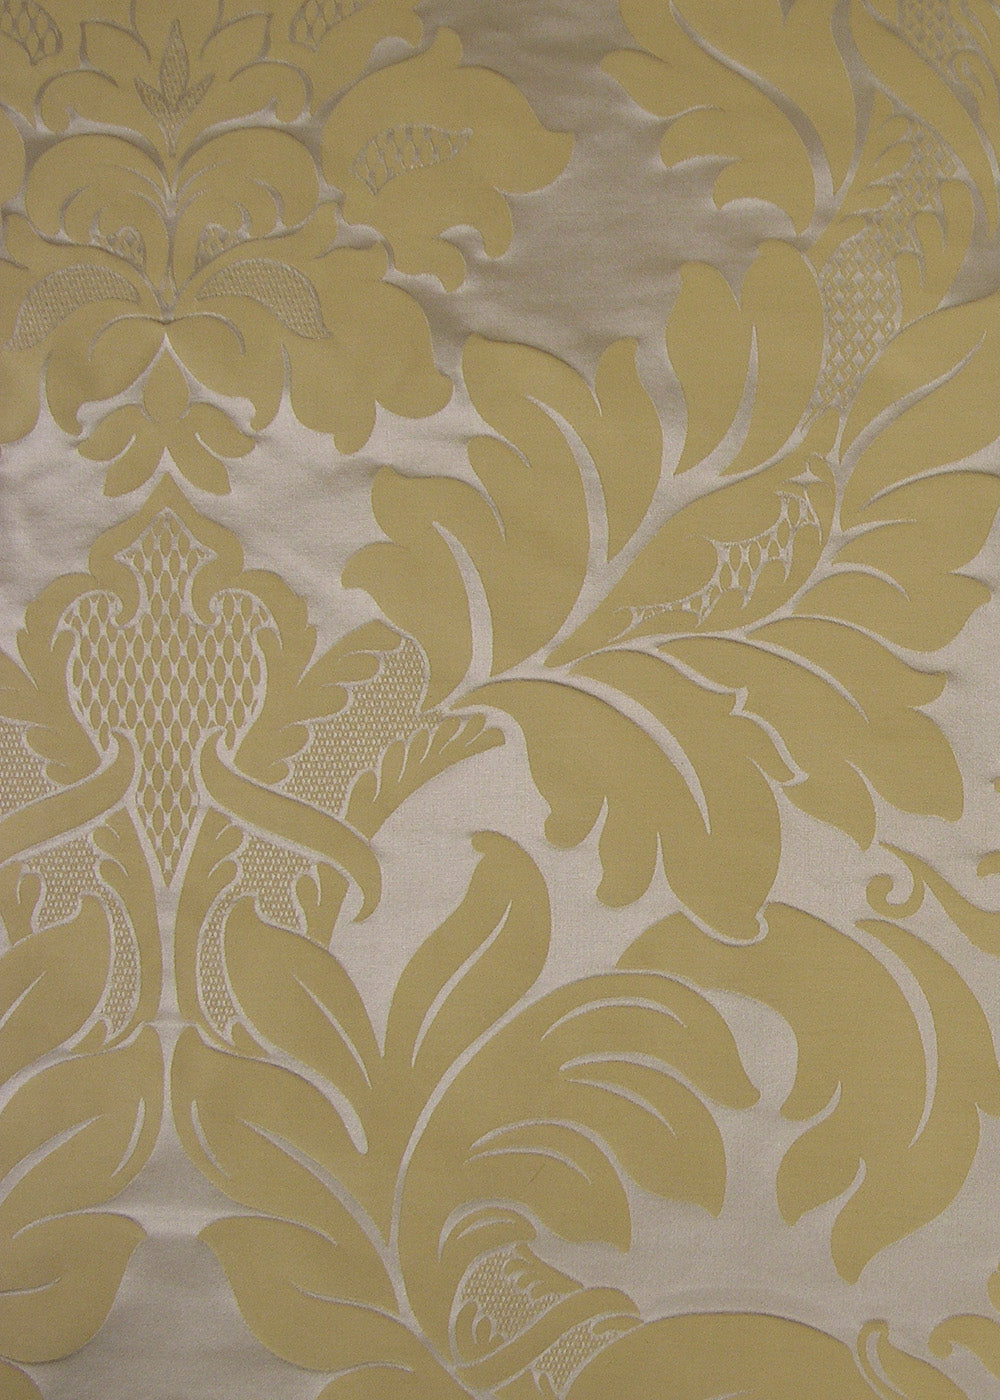 silver satin fabric with a gold damask pattern